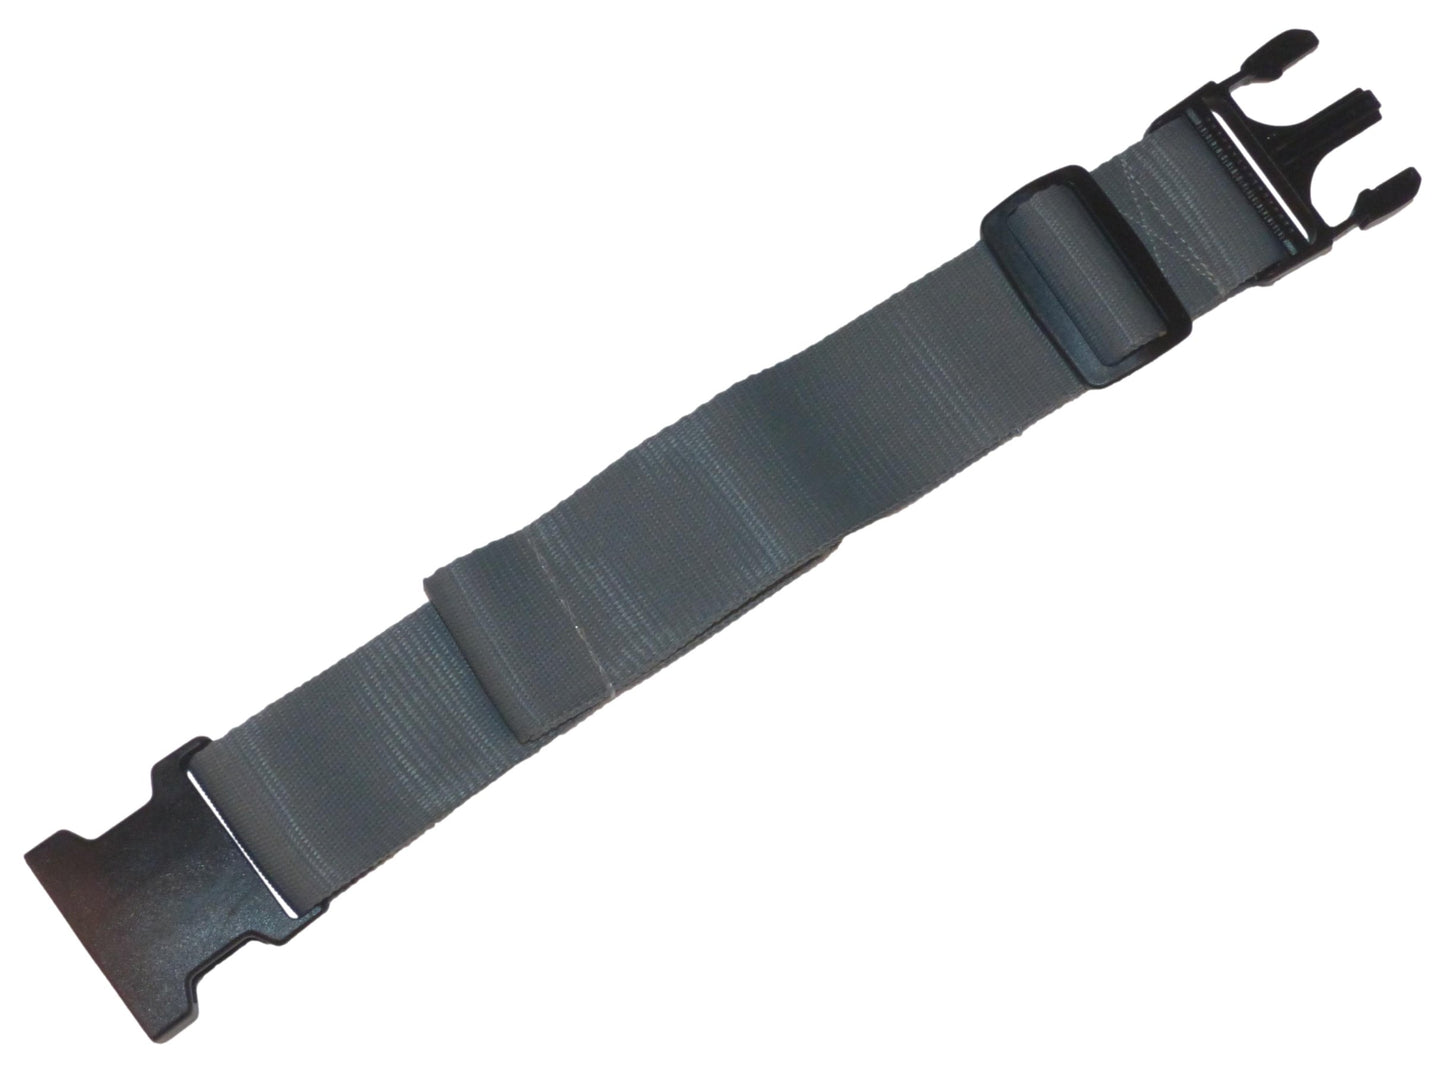 Benristraps 50mm Webbing Strap with Quick Release & Length-Adjusting Buckles in grey